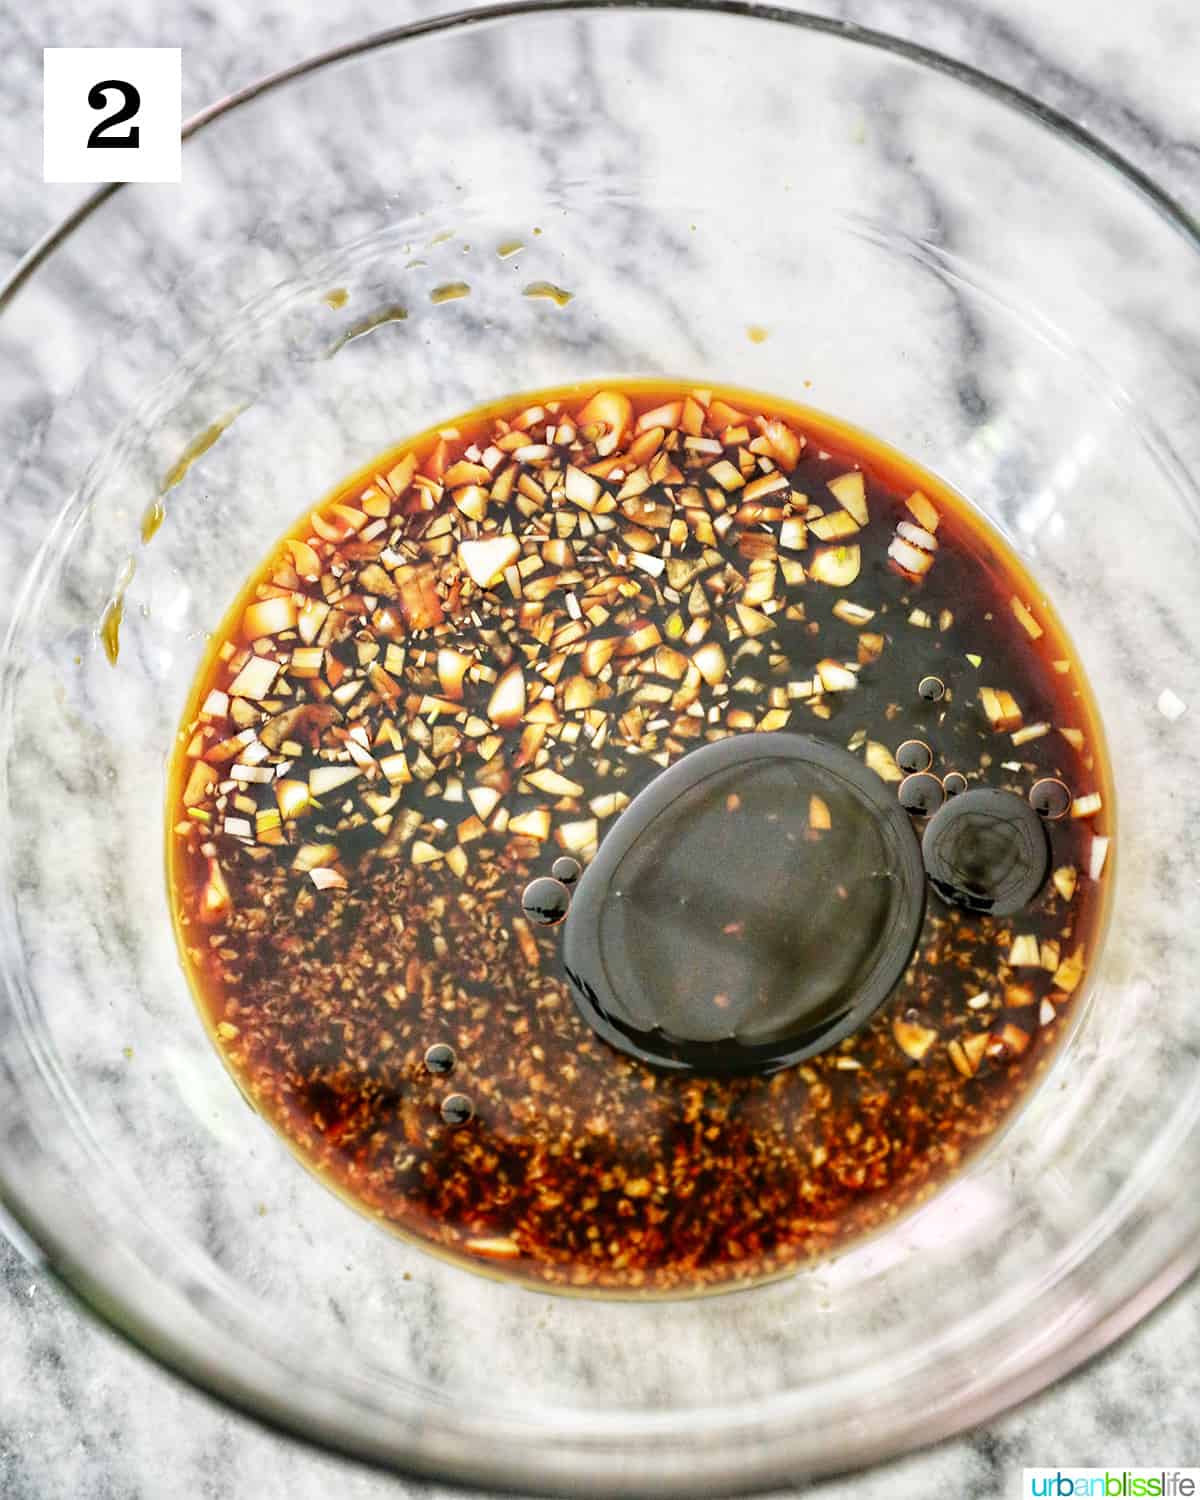 sesame garlic soy sauce in a large clear glass bowl on marble table.